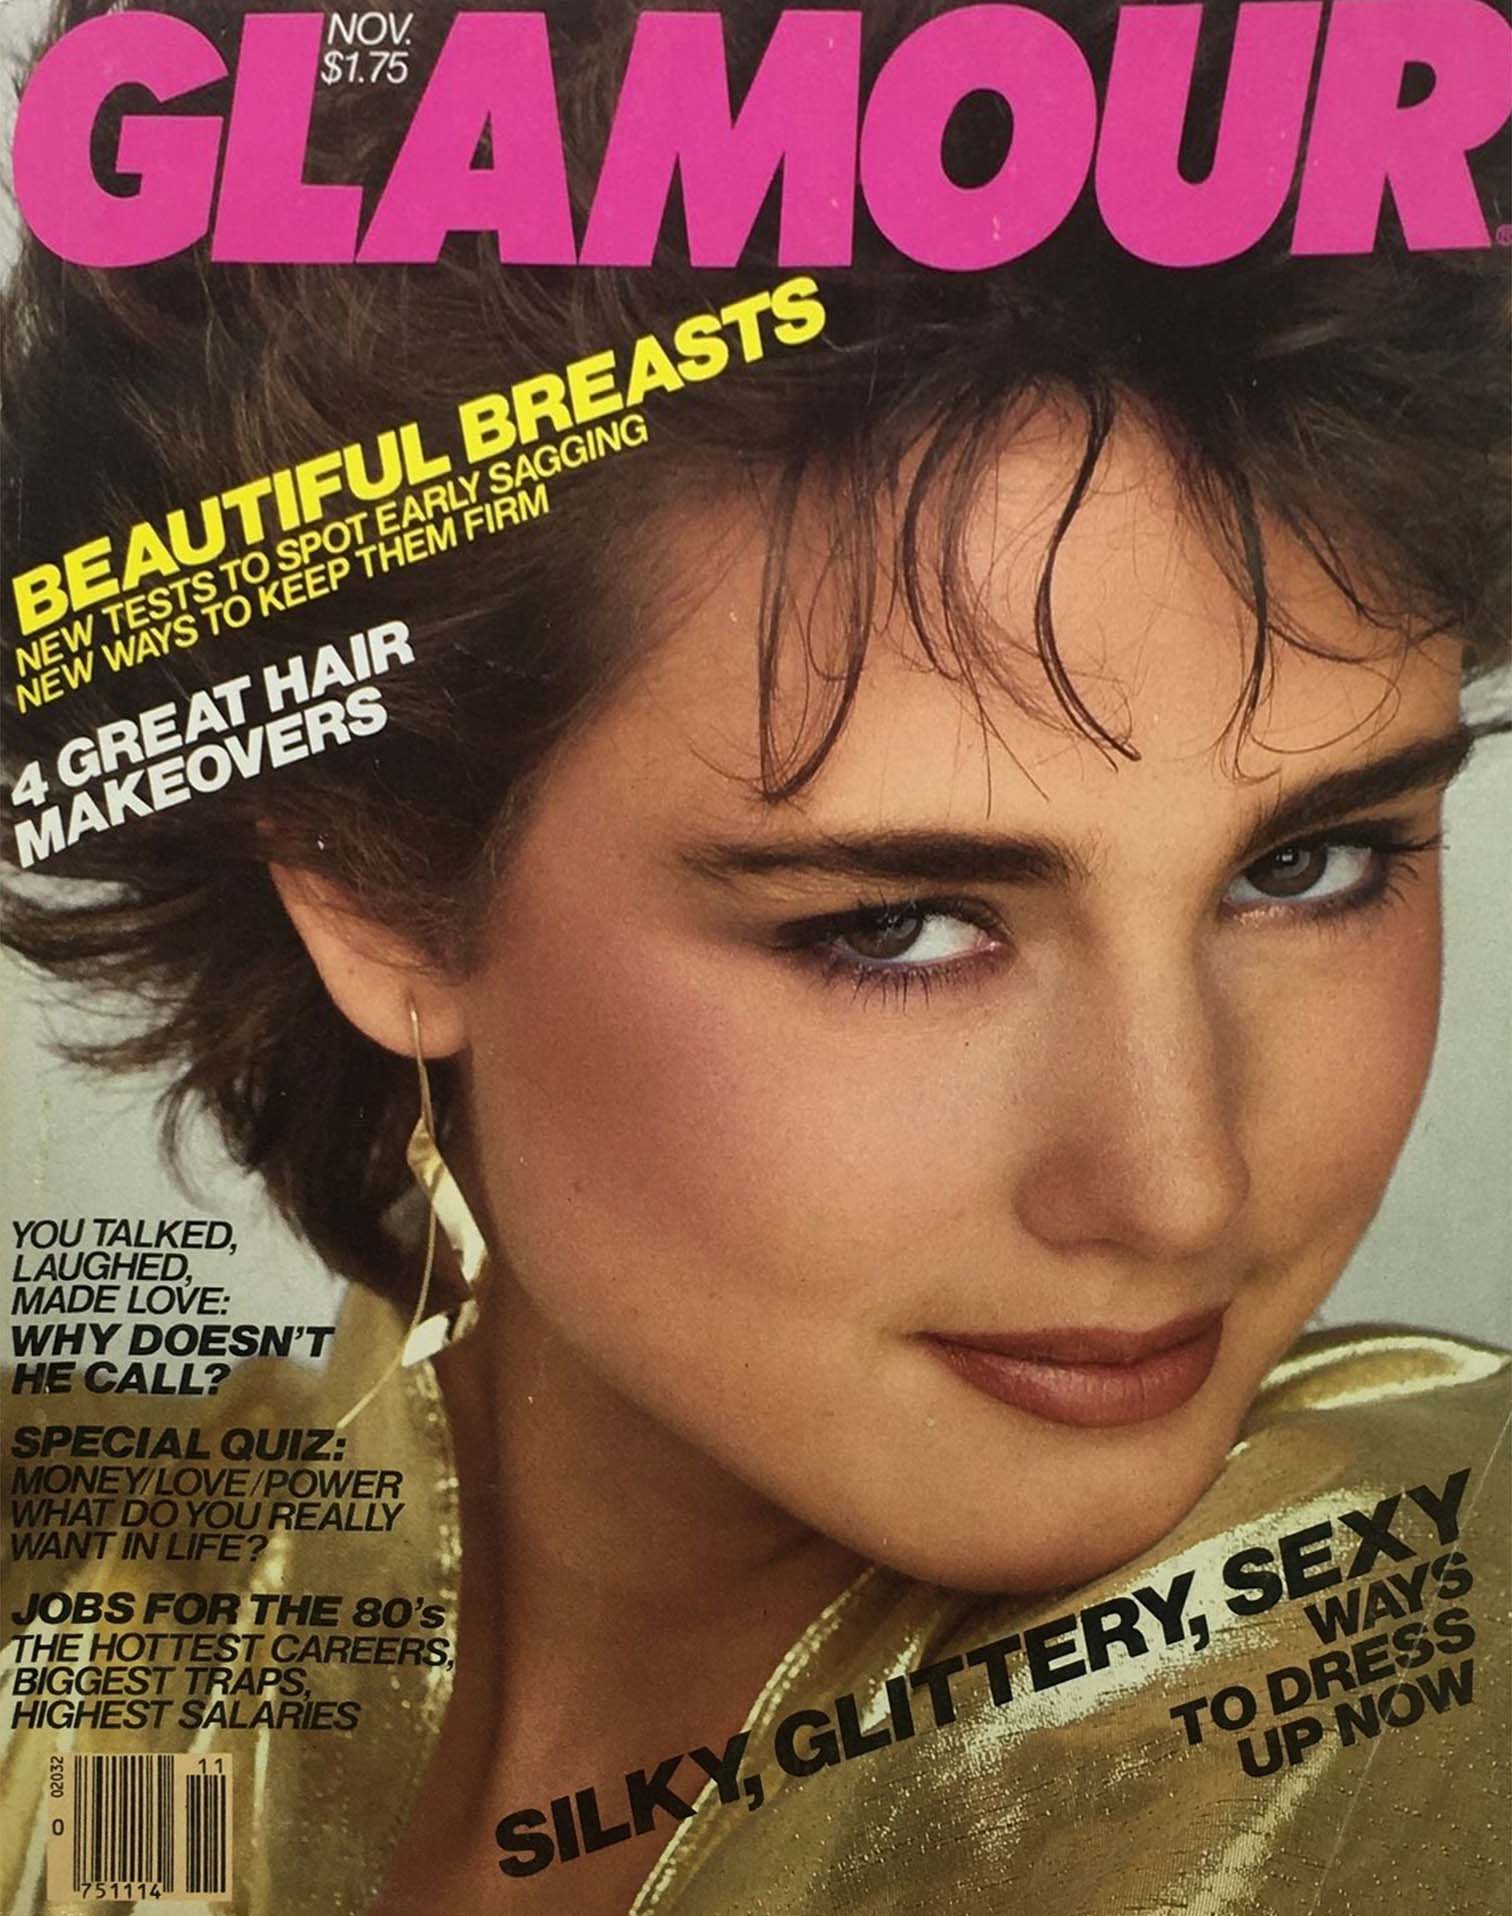 Glamour November 1981 magazine back issue Glamour magizine back copy Glamour November 1981 Womens Magazine Back Issue Published by Conde Nast Publications. Beautiful Breasts New Tests To Spot Early Sagging New Ways To Keep Them Firm.